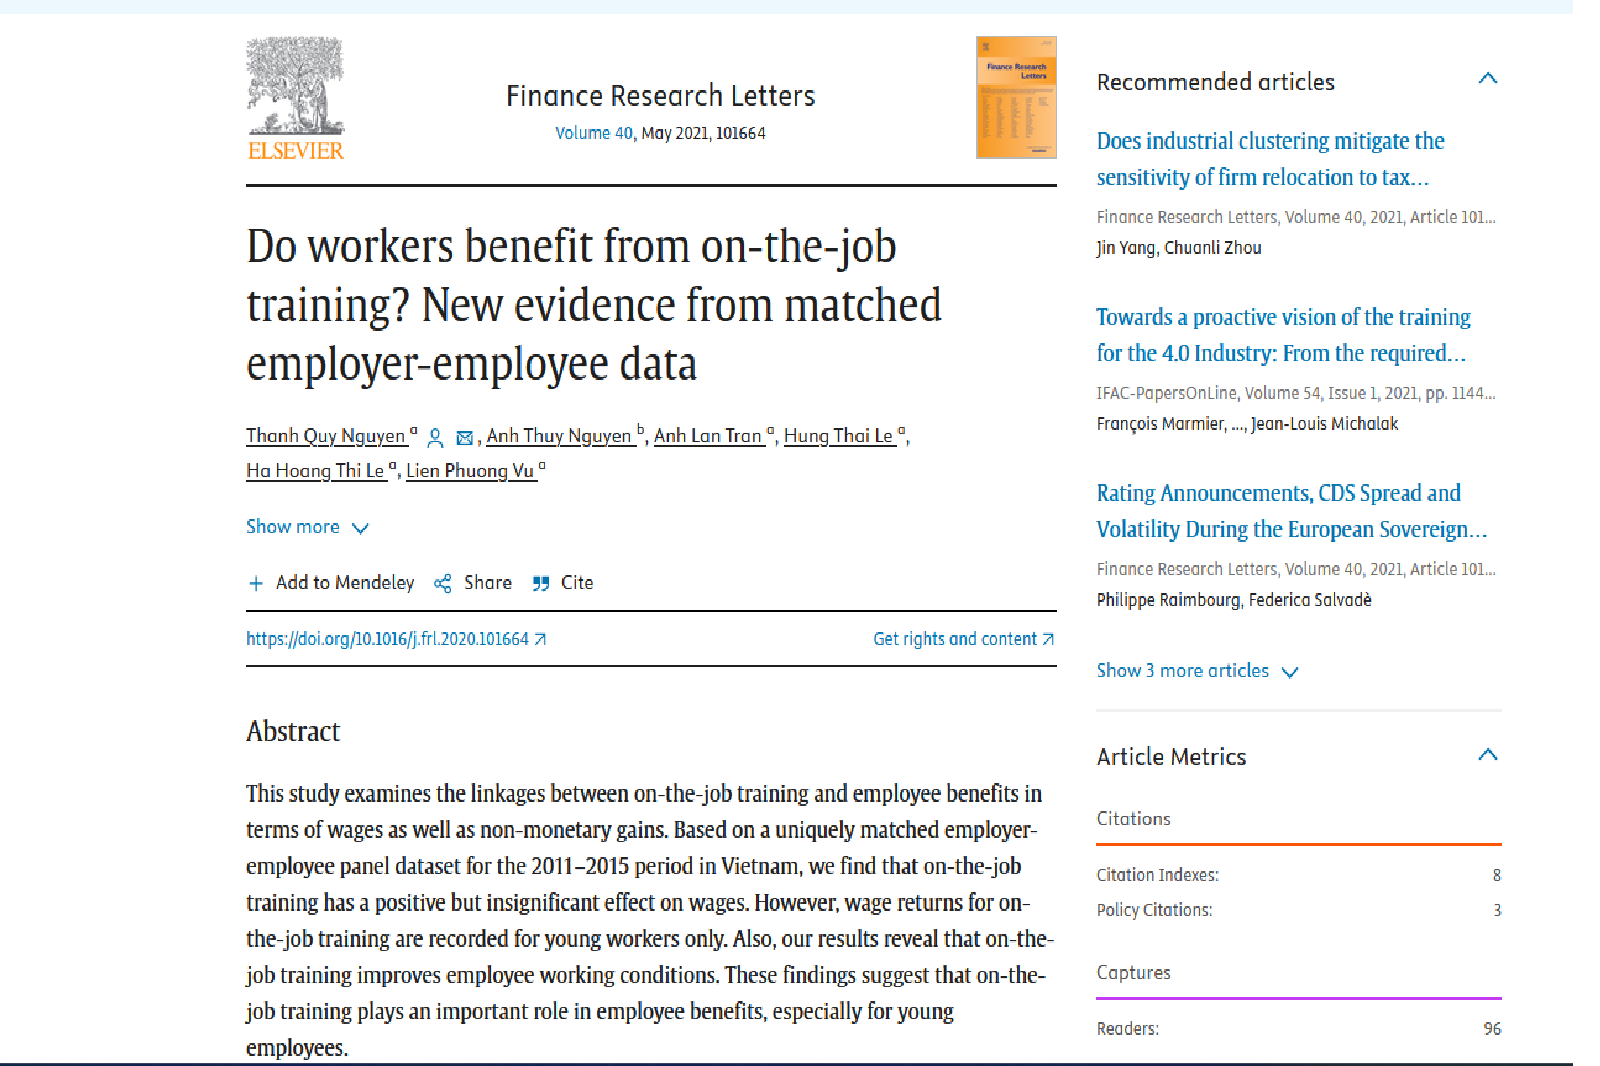 Do Workers Benefit from On-the-Job Training? New Evidence from Matched Employer-Employee Data